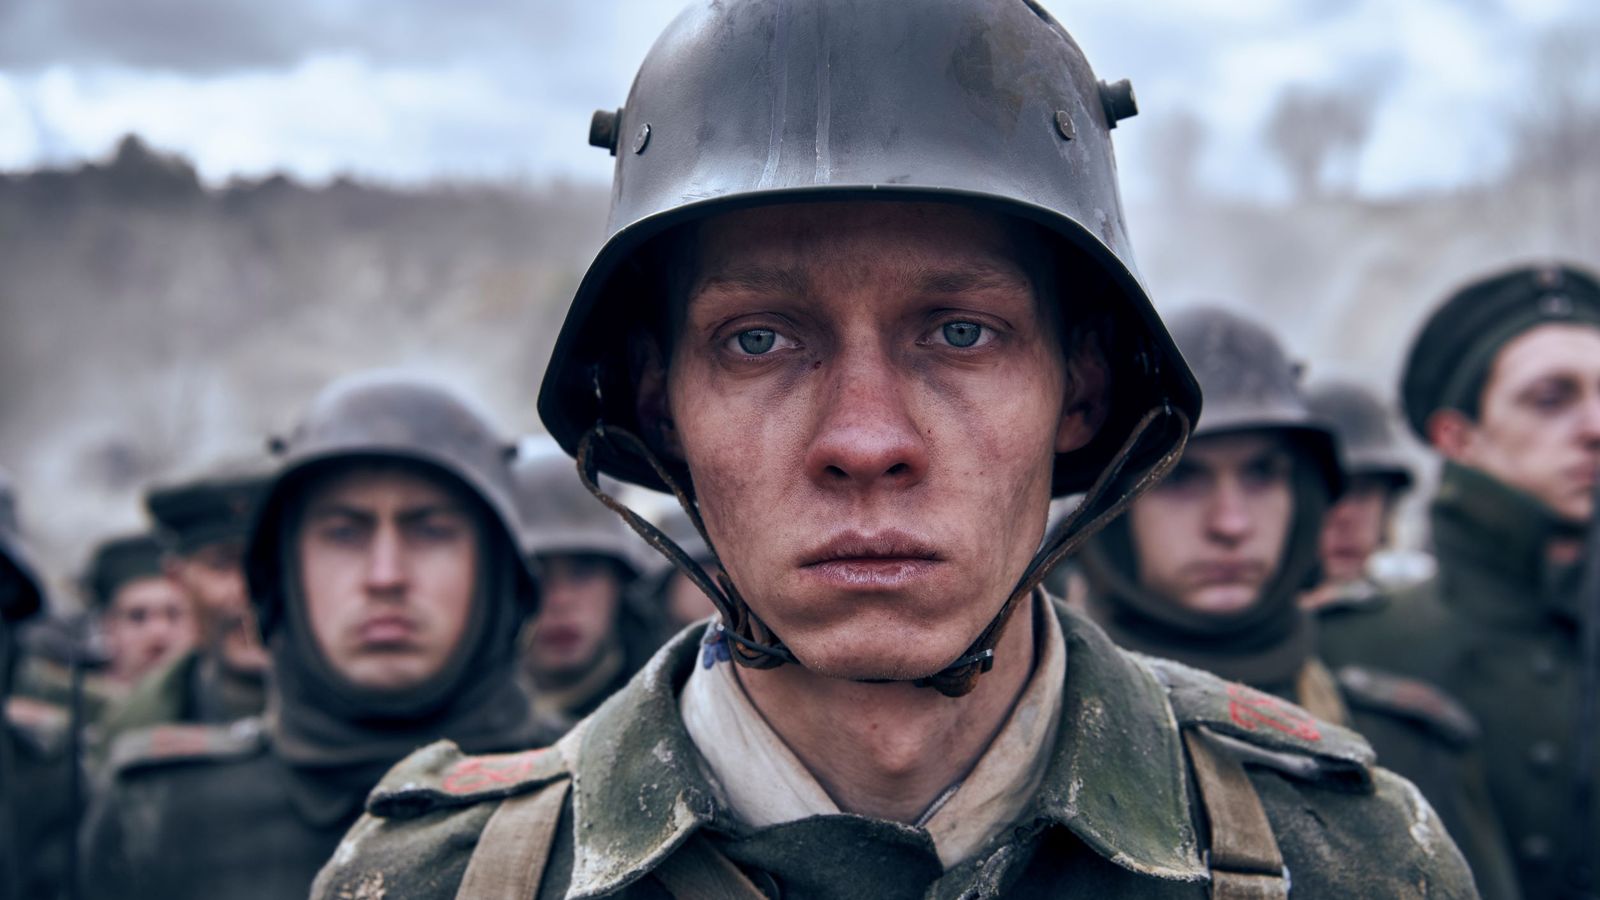 BAFTA Film Awards 2023: All Quiet On The Western Front breaks ceremony's foreign film record